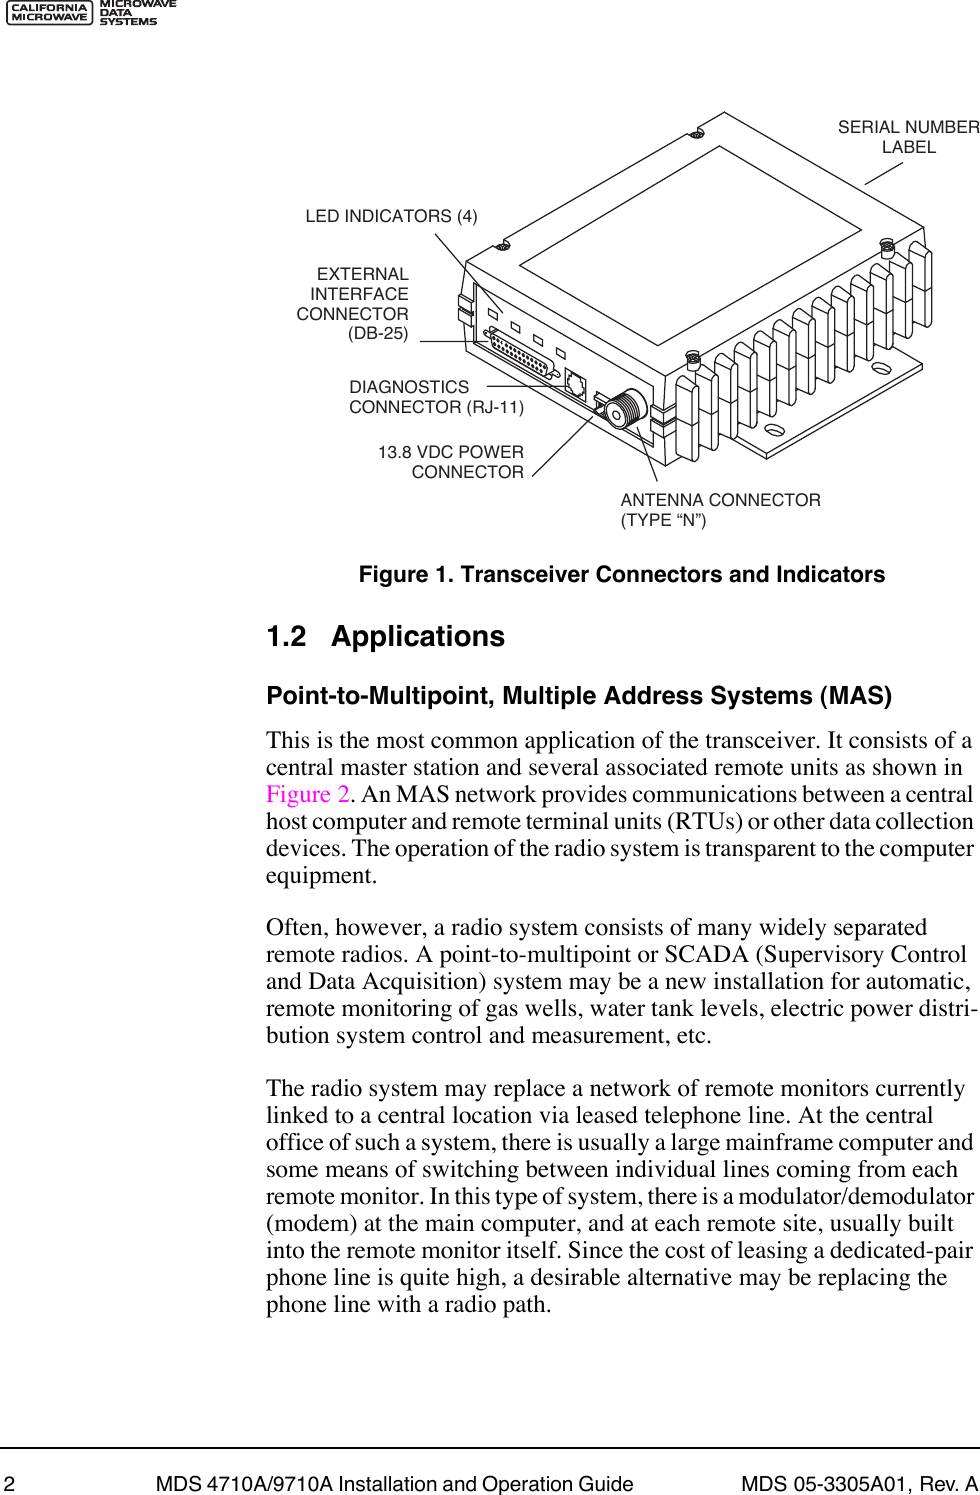  2 MDS 4710A/9710A Installation and Operation Guide  MDS 05-3305A01, Rev. A Invisible place holder Figure 1. Transceiver Connectors and Indicators 1.2 Applications Point-to-Multipoint, Multiple Address Systems (MAS) This is the most common application of the transceiver. It consists of a central master station and several associated remote units as shown in Figure 2. An MAS network provides communications between a central host computer and remote terminal units (RTUs) or other data collection devices. The operation of the radio system is transparent to the computer equipment.Often, however, a radio system consists of many widely separated remote radios. A point-to-multipoint or SCADA (Supervisory Control and Data Acquisition) system may be a new installation for automatic, remote monitoring of gas wells, water tank levels, electric power distri-bution system control and measurement, etc.The radio system may replace a network of remote monitors currently linked to a central location via leased telephone line. At the central office of such a system, there is usually a large mainframe computer and some means of switching between individual lines coming from each remote monitor. In this type of system, there is a modulator/demodulator (modem) at the main computer, and at each remote site, usually built into the remote monitor itself. Since the cost of leasing a dedicated-pair phone line is quite high, a desirable alternative may be replacing the phone line with a radio path.EXTERNAL INTERFACECONNECTOR(DB-25)DIAGNOSTICS CONNECTOR (RJ-11)13.8 VDC POWER CONNECTORANTENNA CONNECTOR(TYPE ÒNÓ)SERIAL NUMBERLABELLED INDICATORS (4)